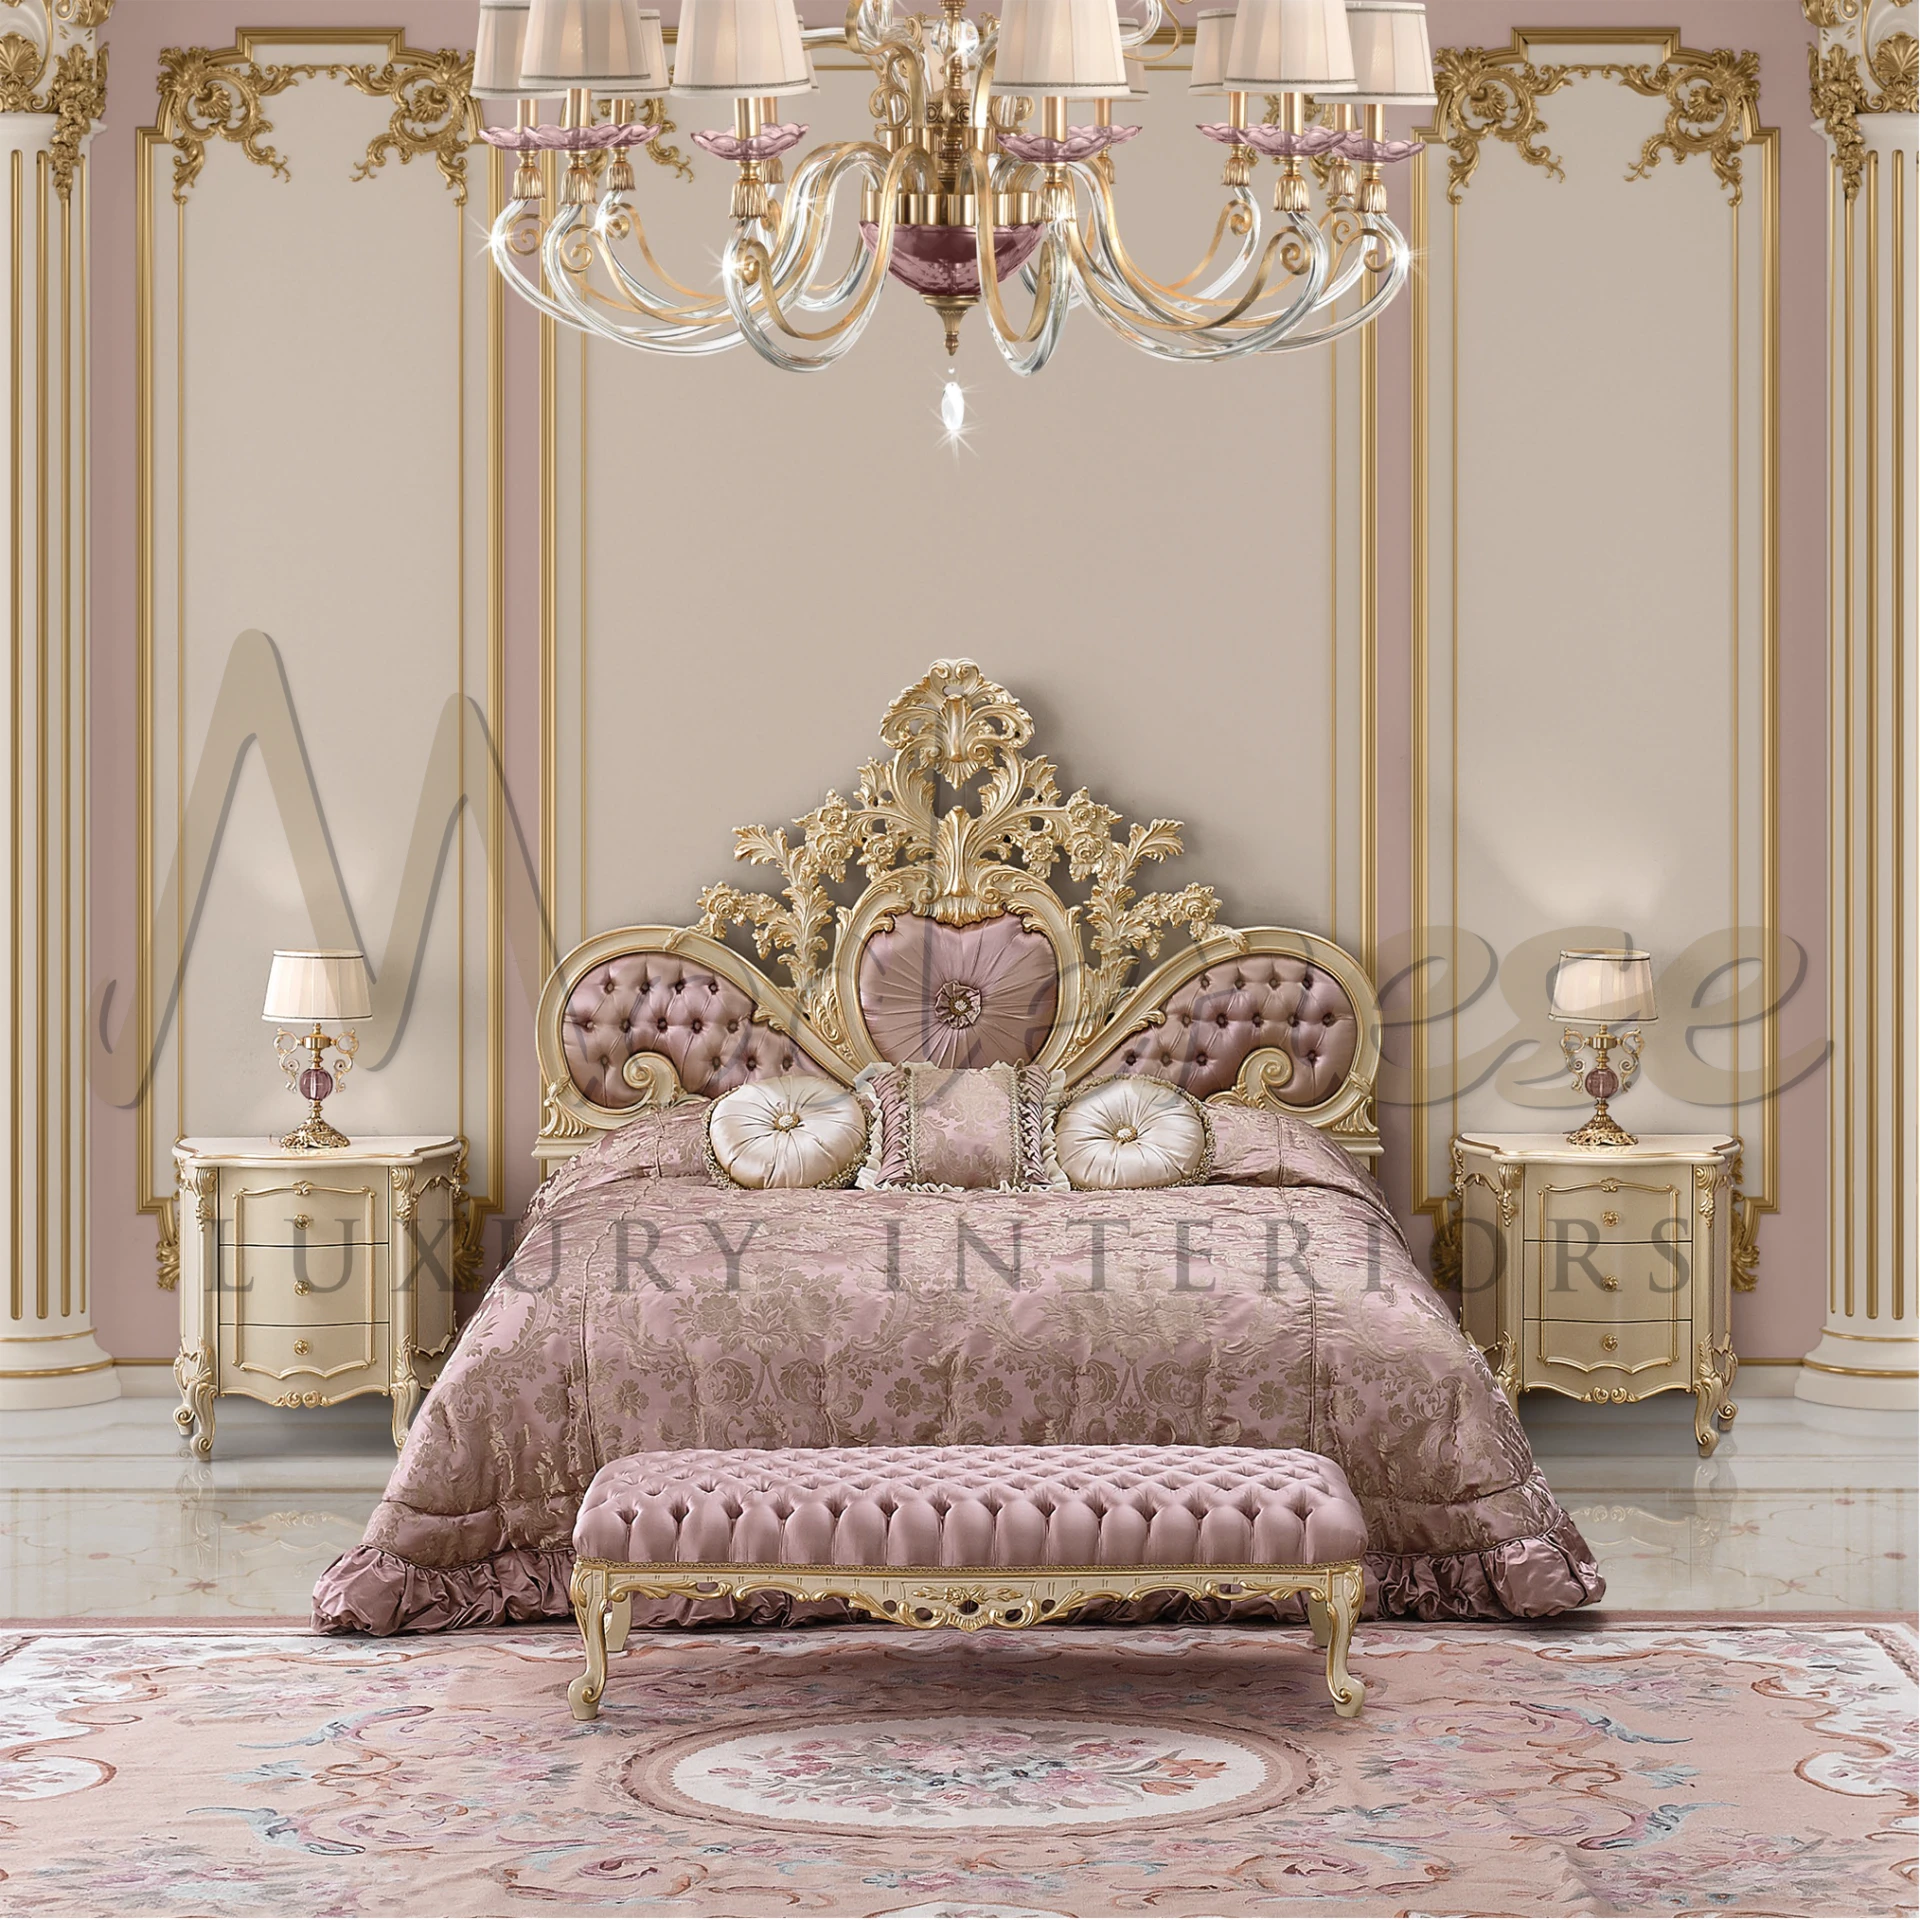 Sumptuous and serene, the Pink Luxury Bed Cover offers a tranquil and luxurious sleep experience, crafted with high-quality textiles.